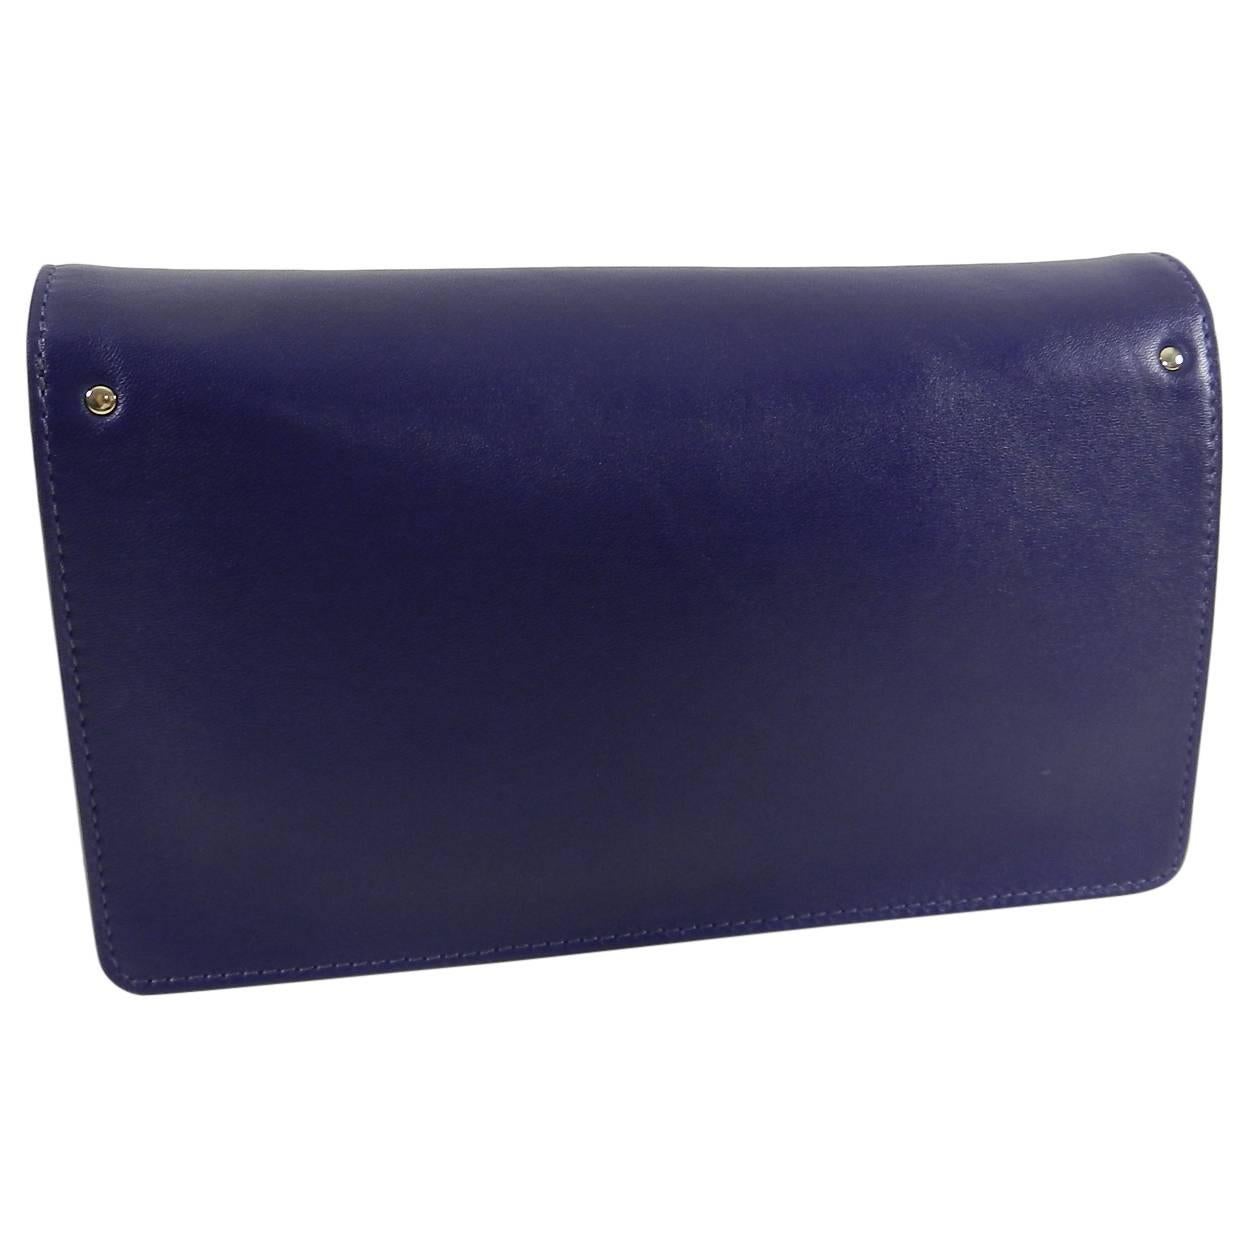 Purple Chloe Navy Gabrielle Clutch Navy Leather and Suede